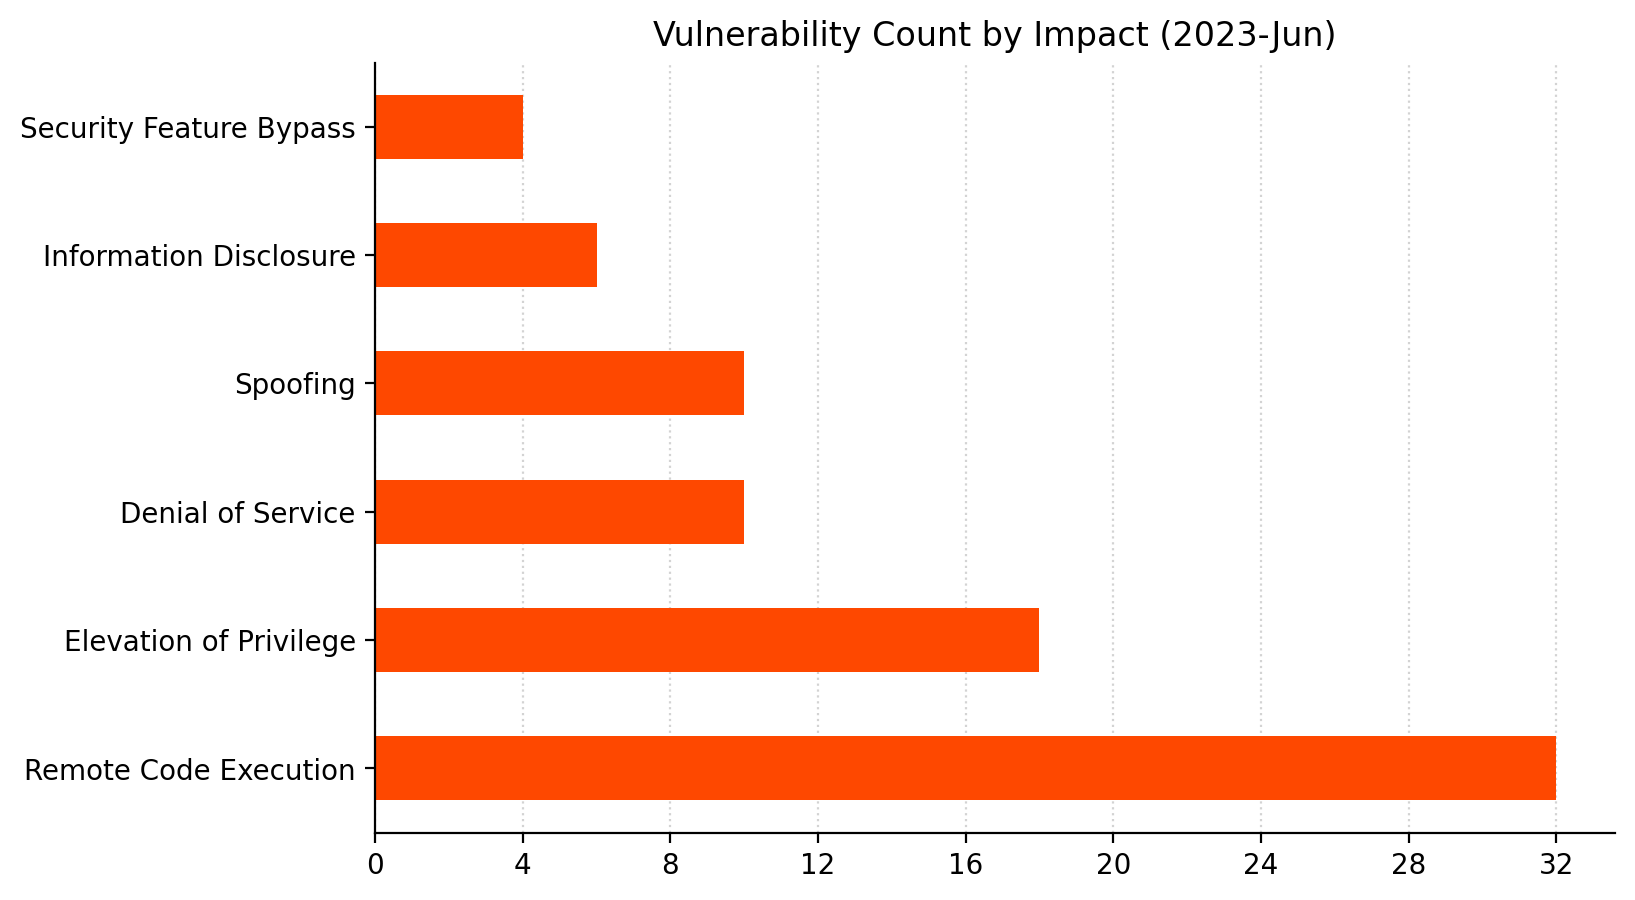 A bar chart showing the distribution of vulnerabilities by impact type for Microsoft Patch Tuesday June 2023.